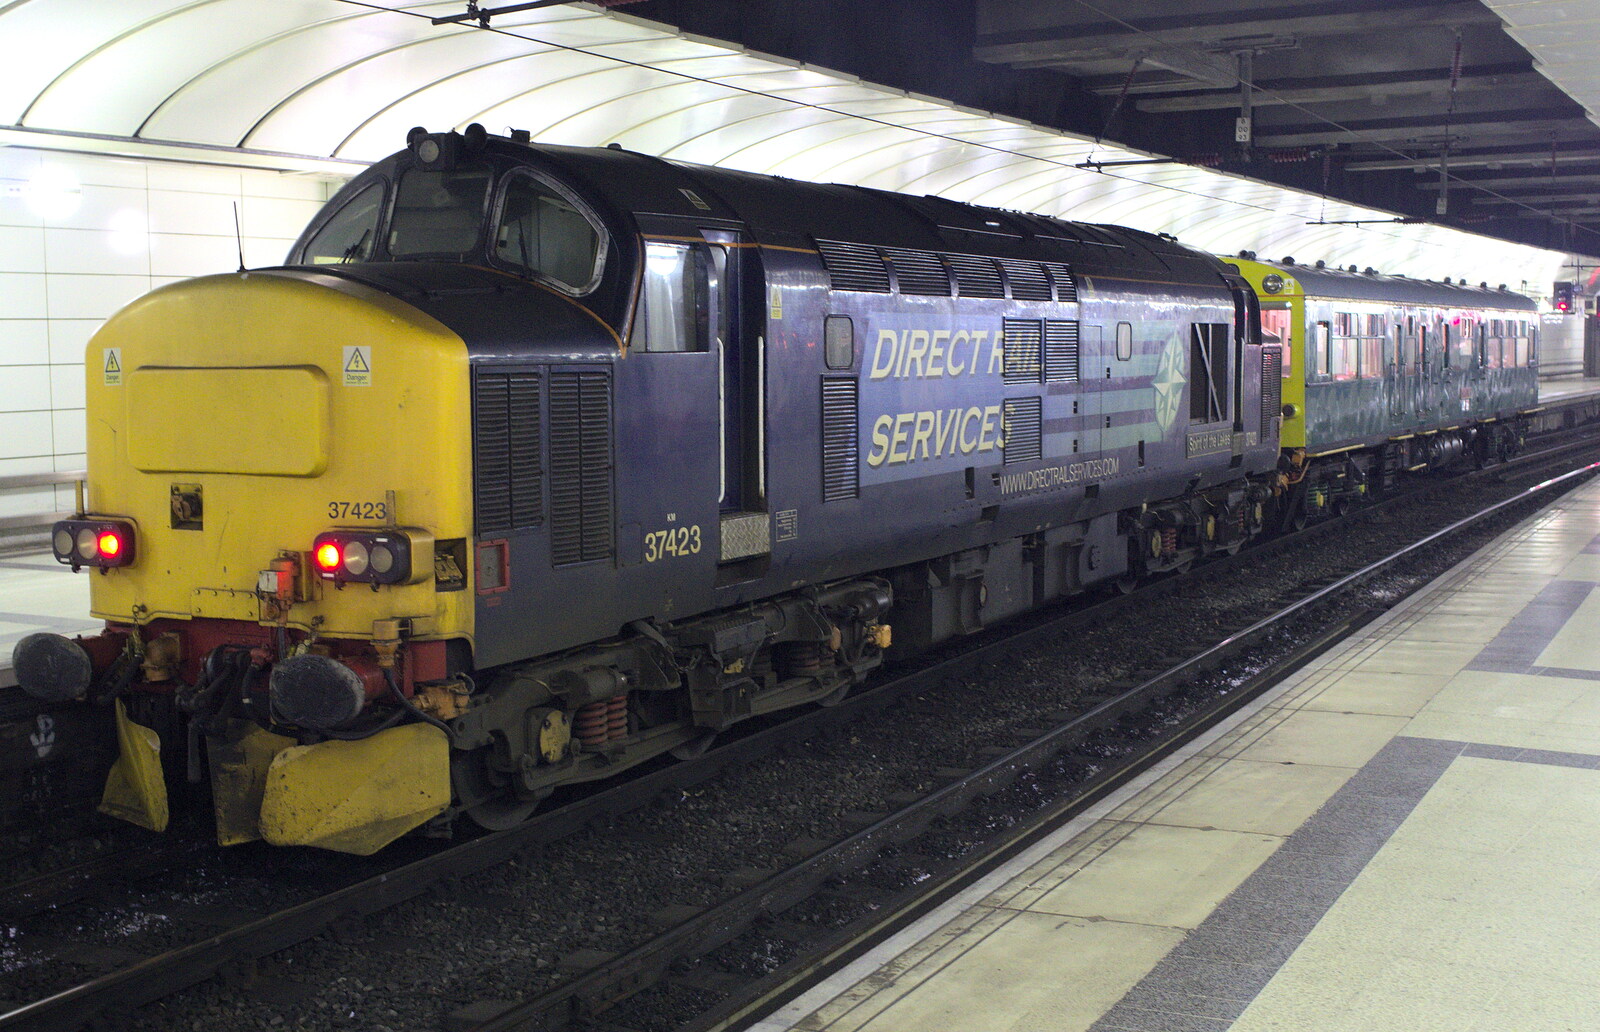 Class 37 37423 on platform 11 from Demolition of the Bacon Factory, and Railway Dereliction, Ipswich and London - 5th March 2013